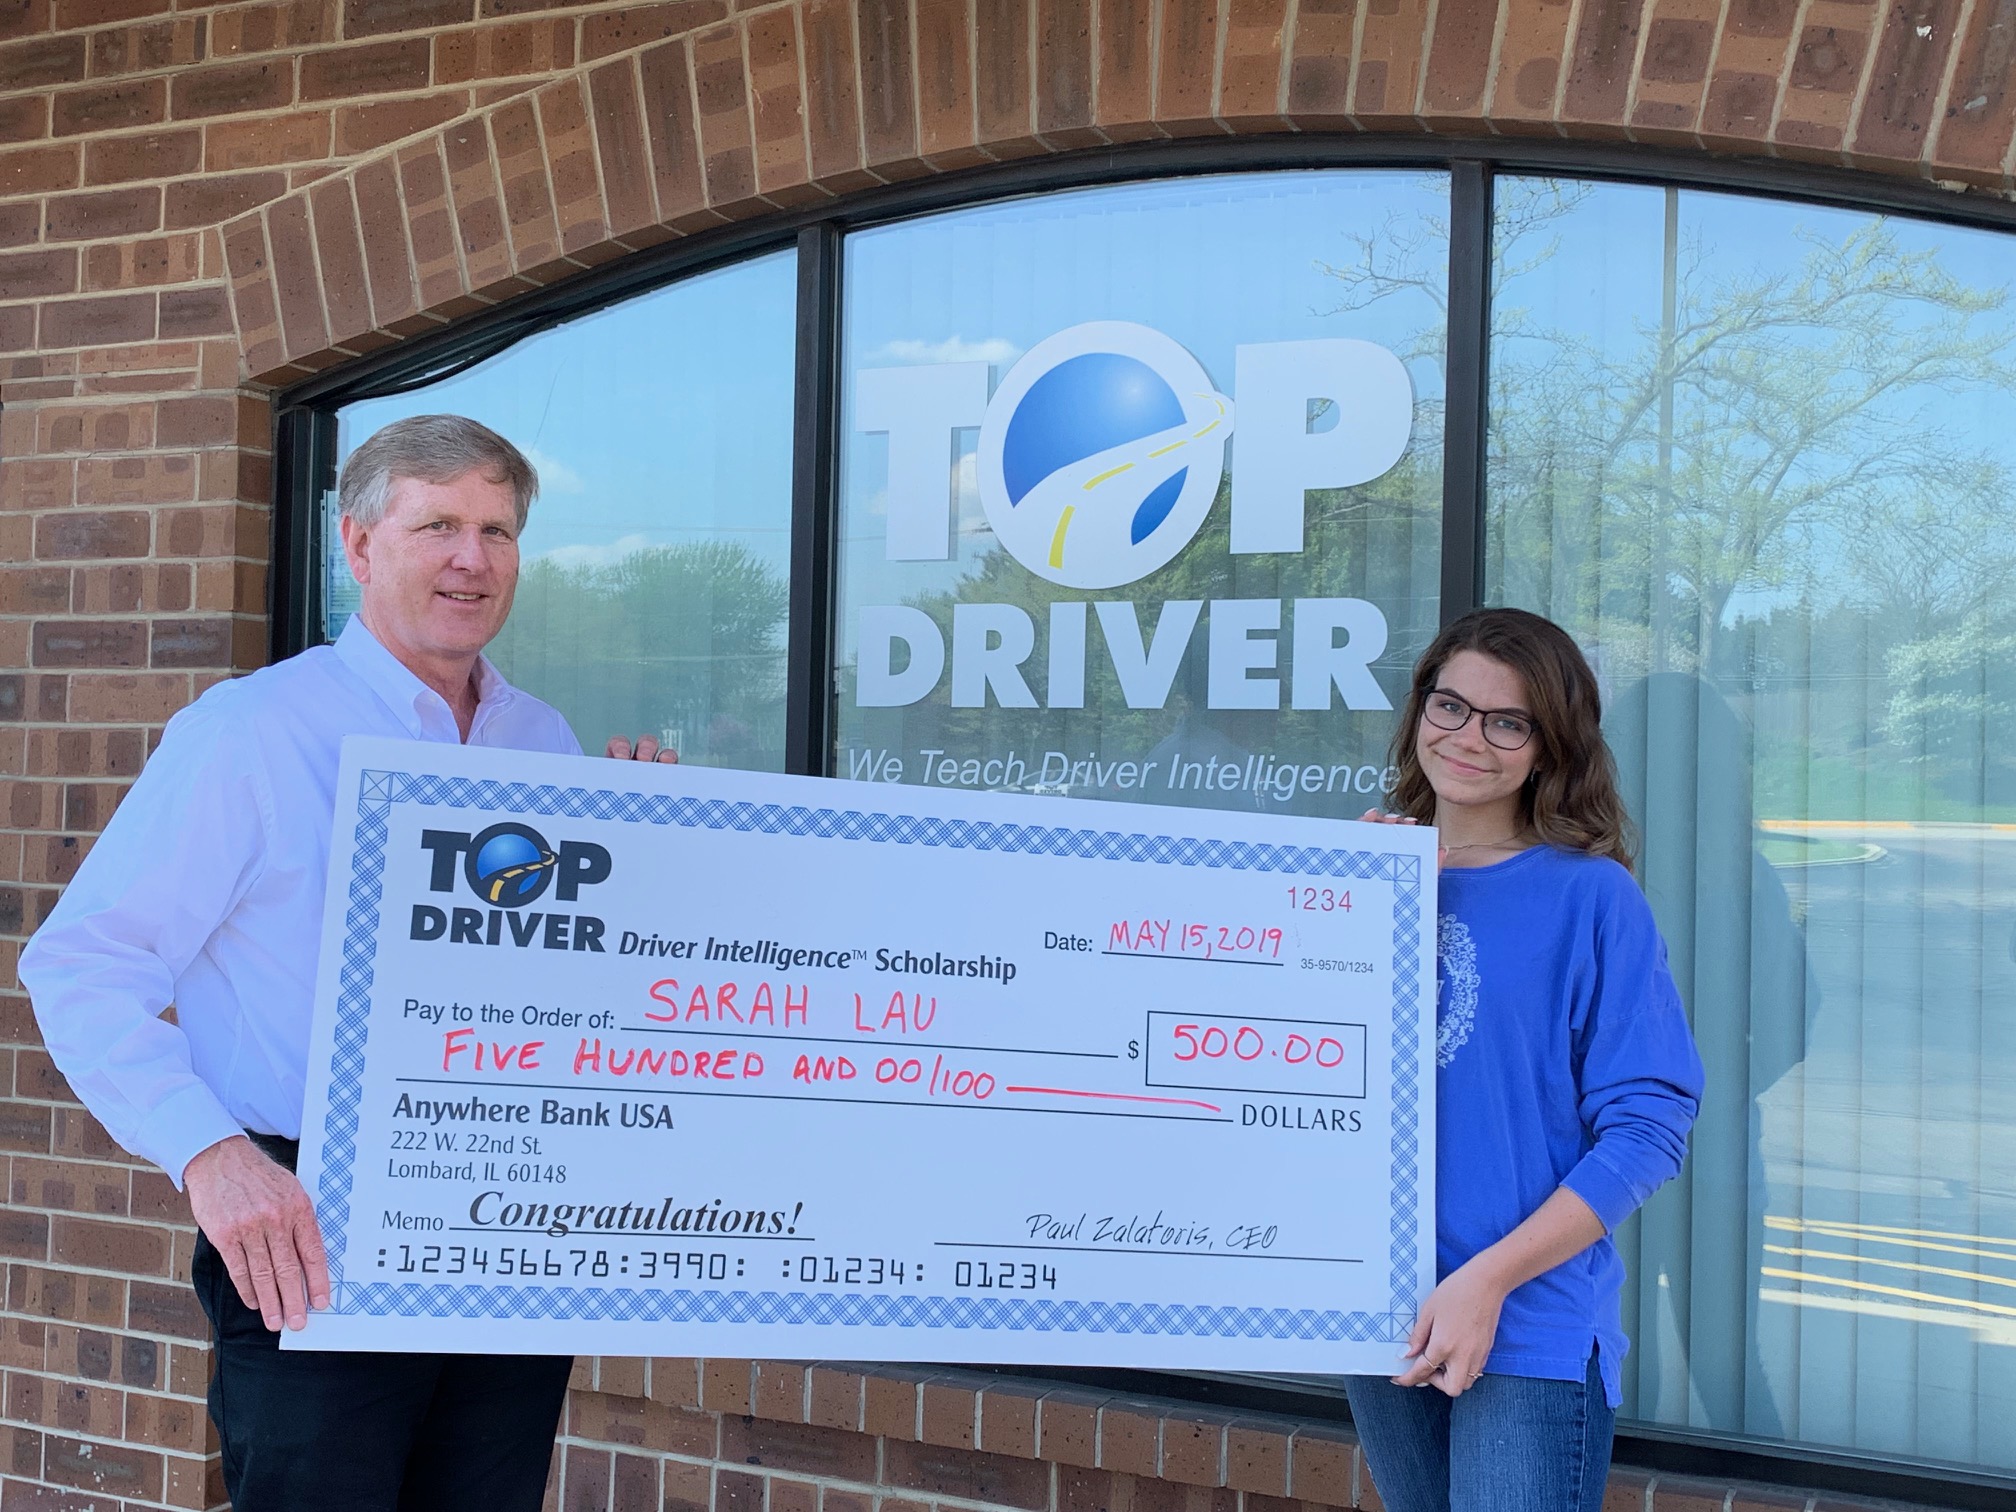 Sarah Lau $500 check from Top Driver